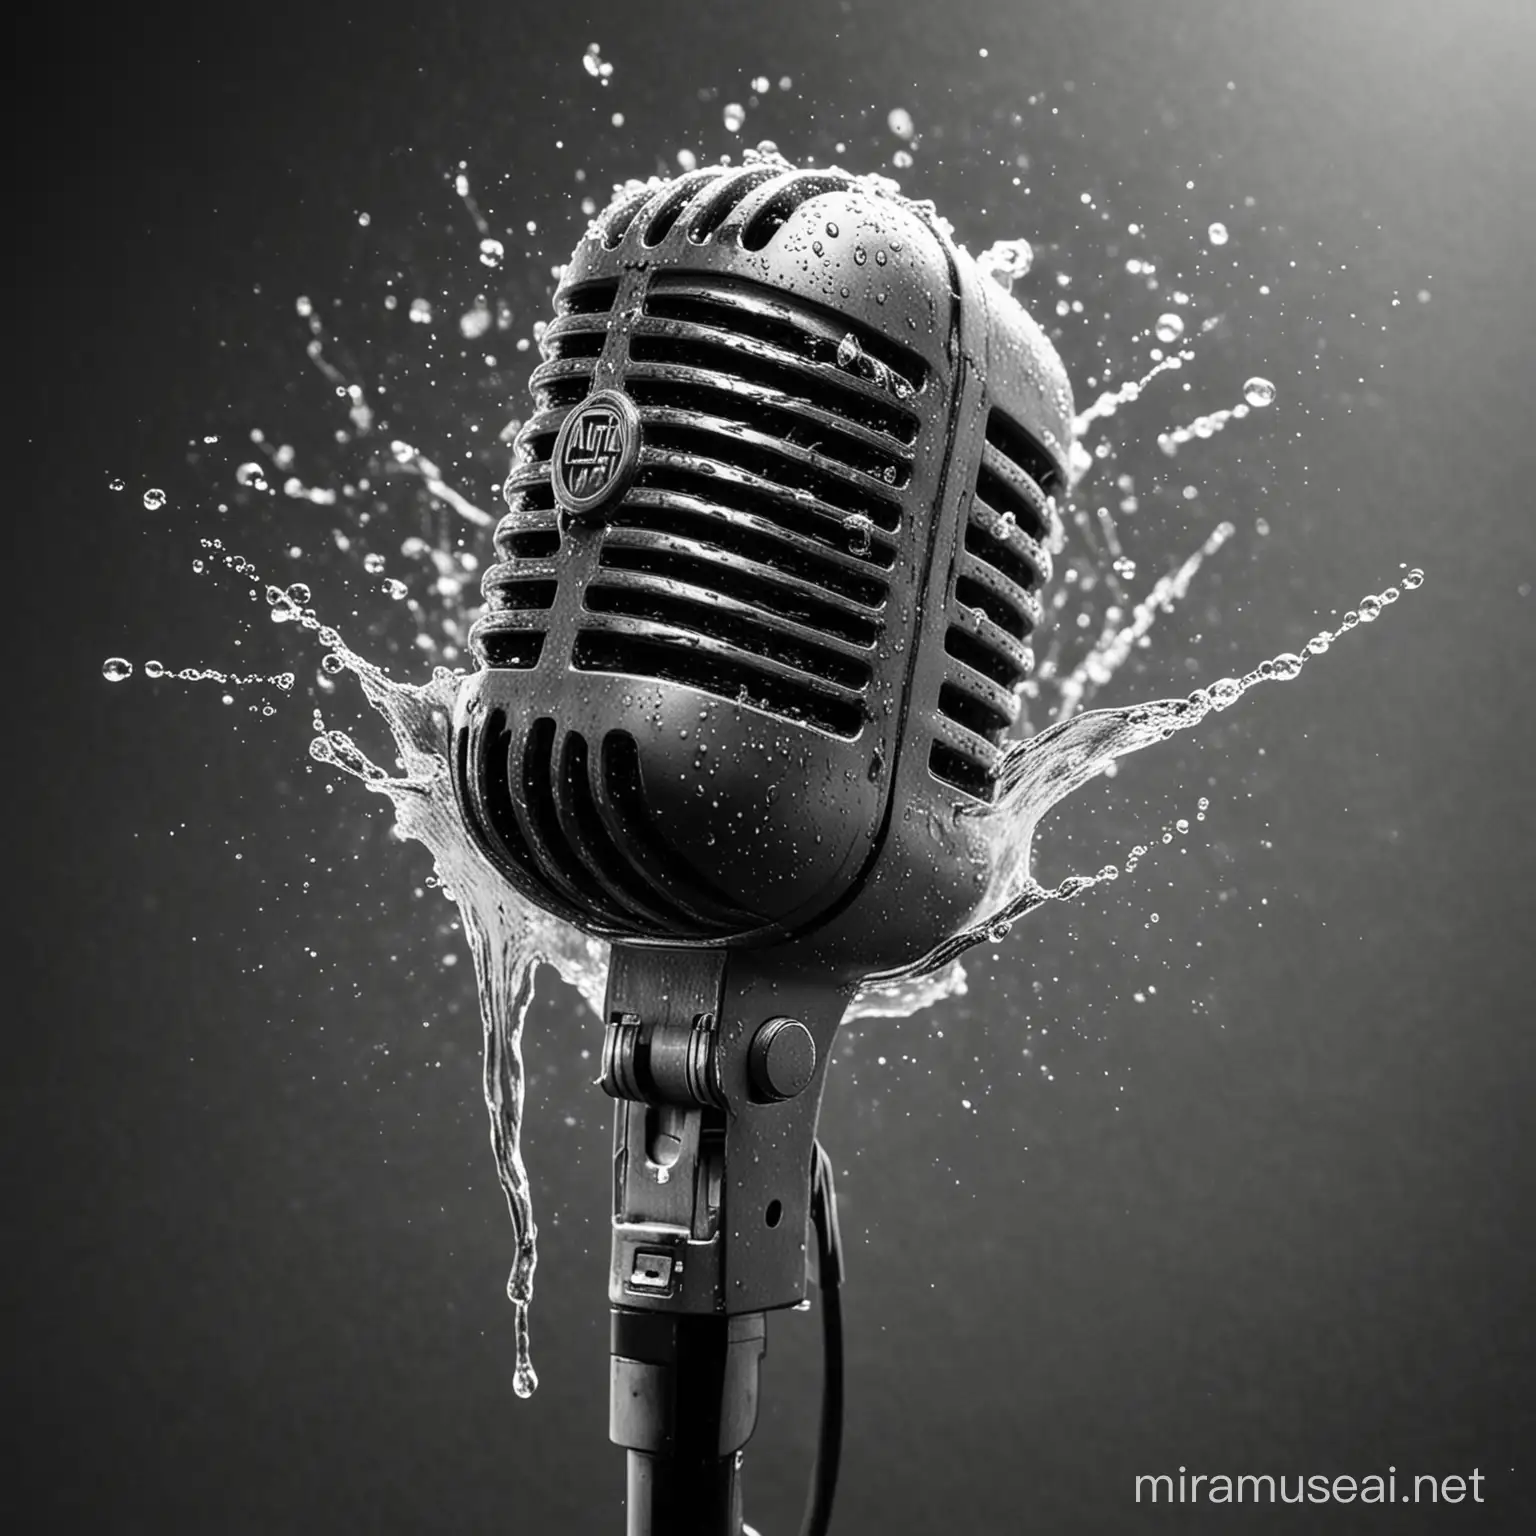 Old school mic covered in a splash of water